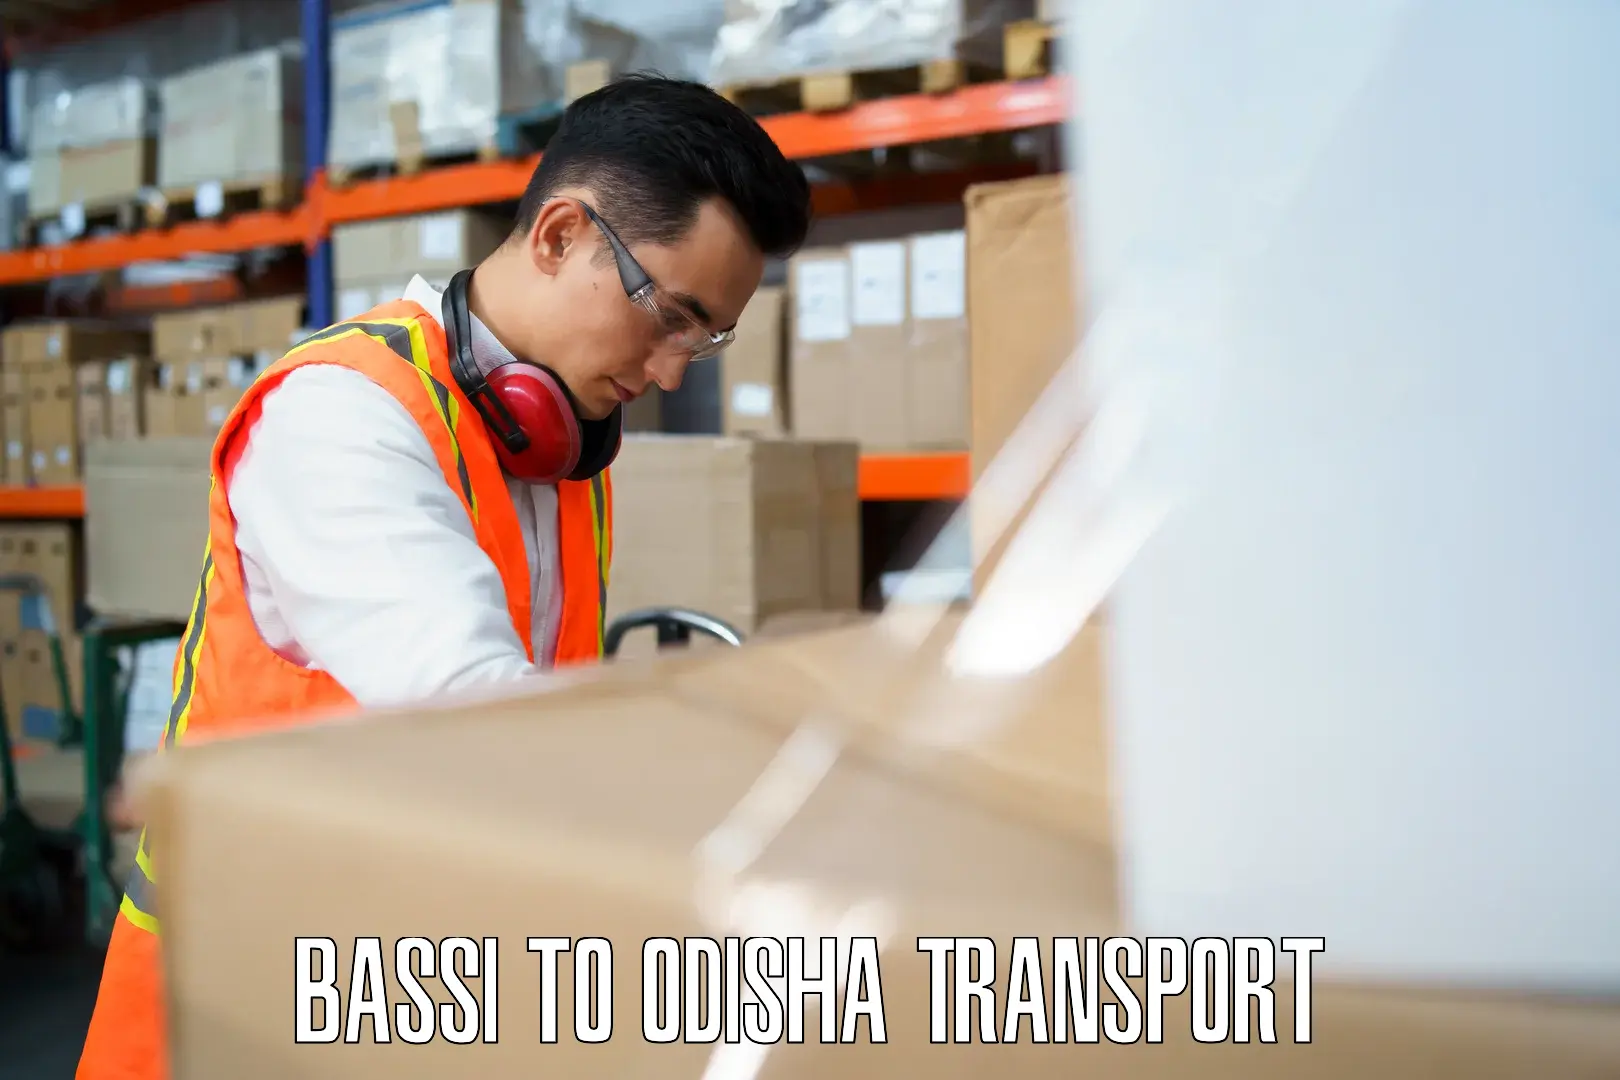 Goods delivery service Bassi to Odisha